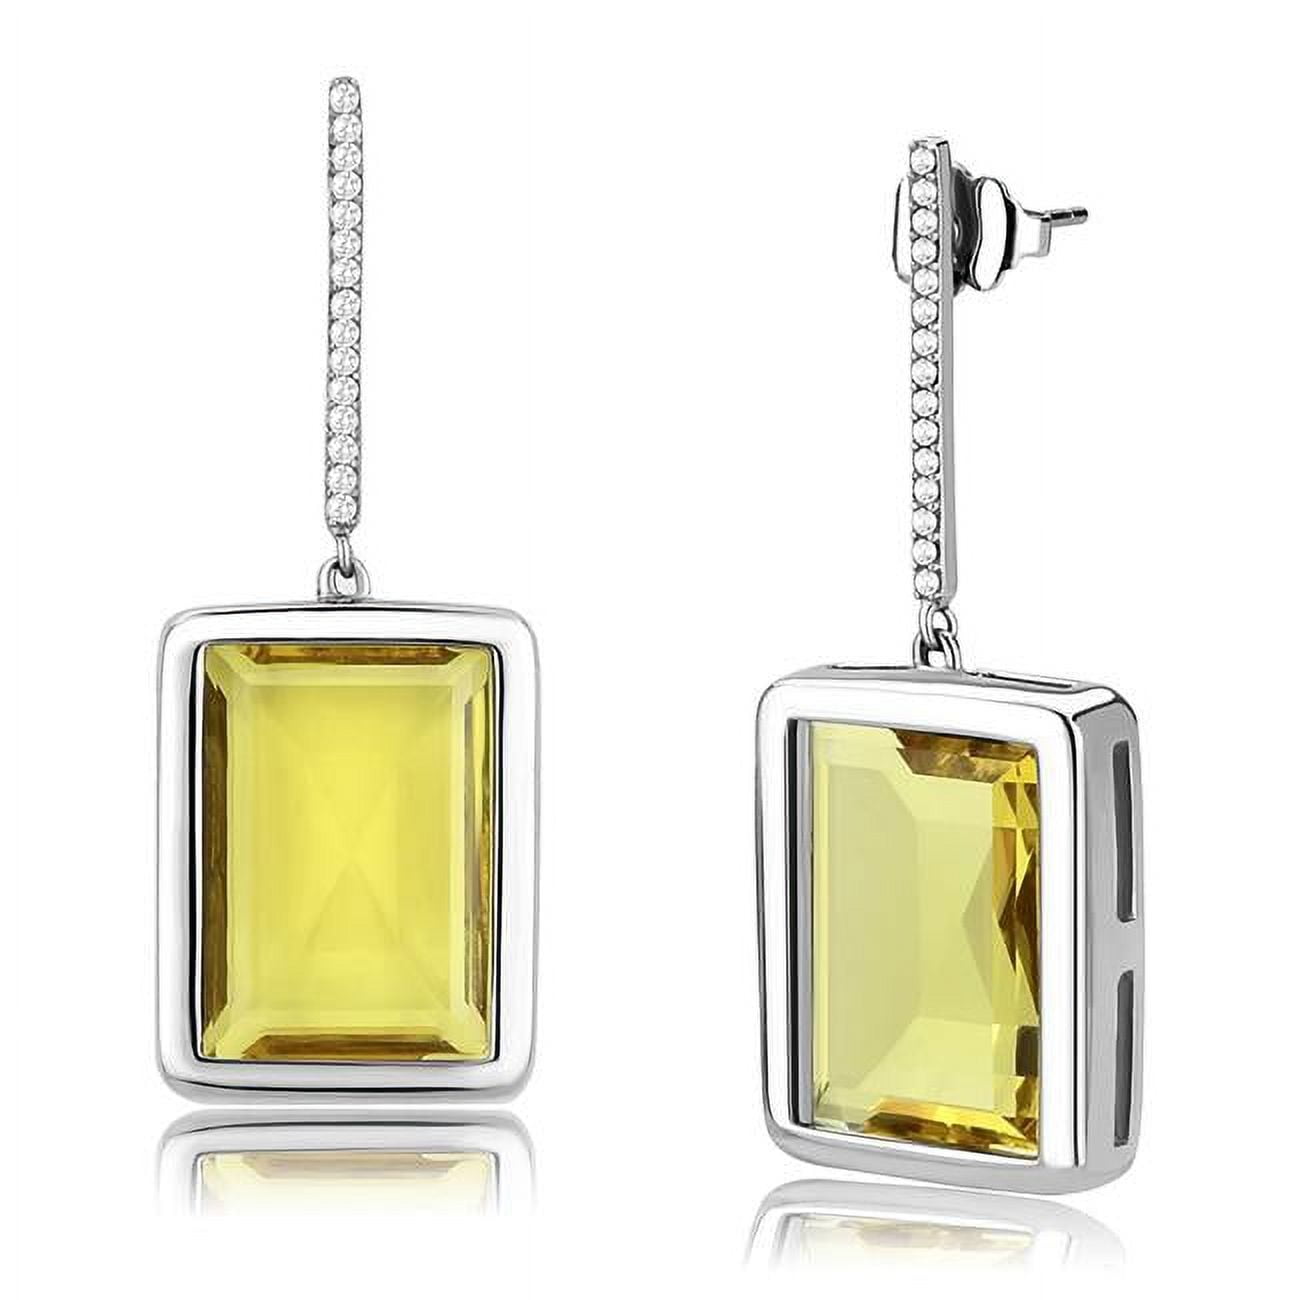 Picture of Alamode DA378 Women High Polished Stainless Steel Earrings with Top Grade Crystal in Topaz